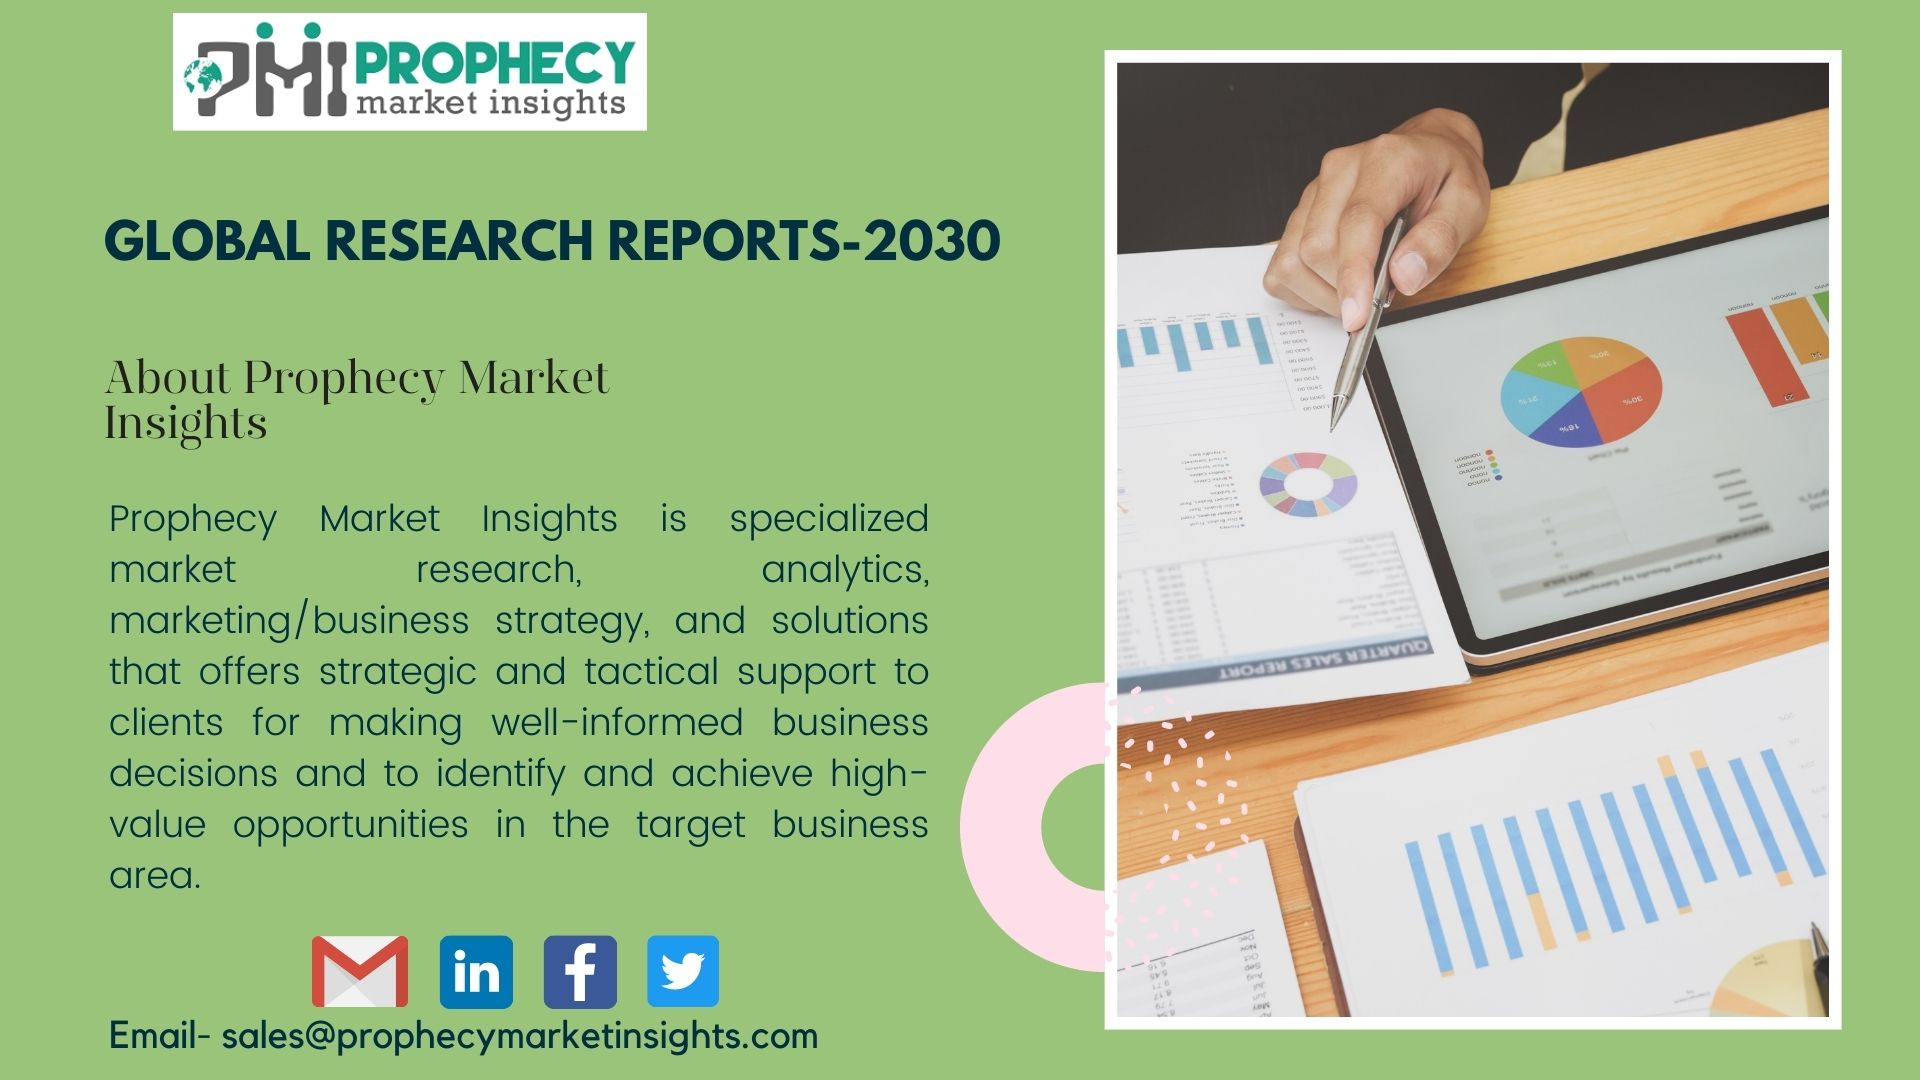 About Prophecy Market Insights (1)-9ad3ad4d